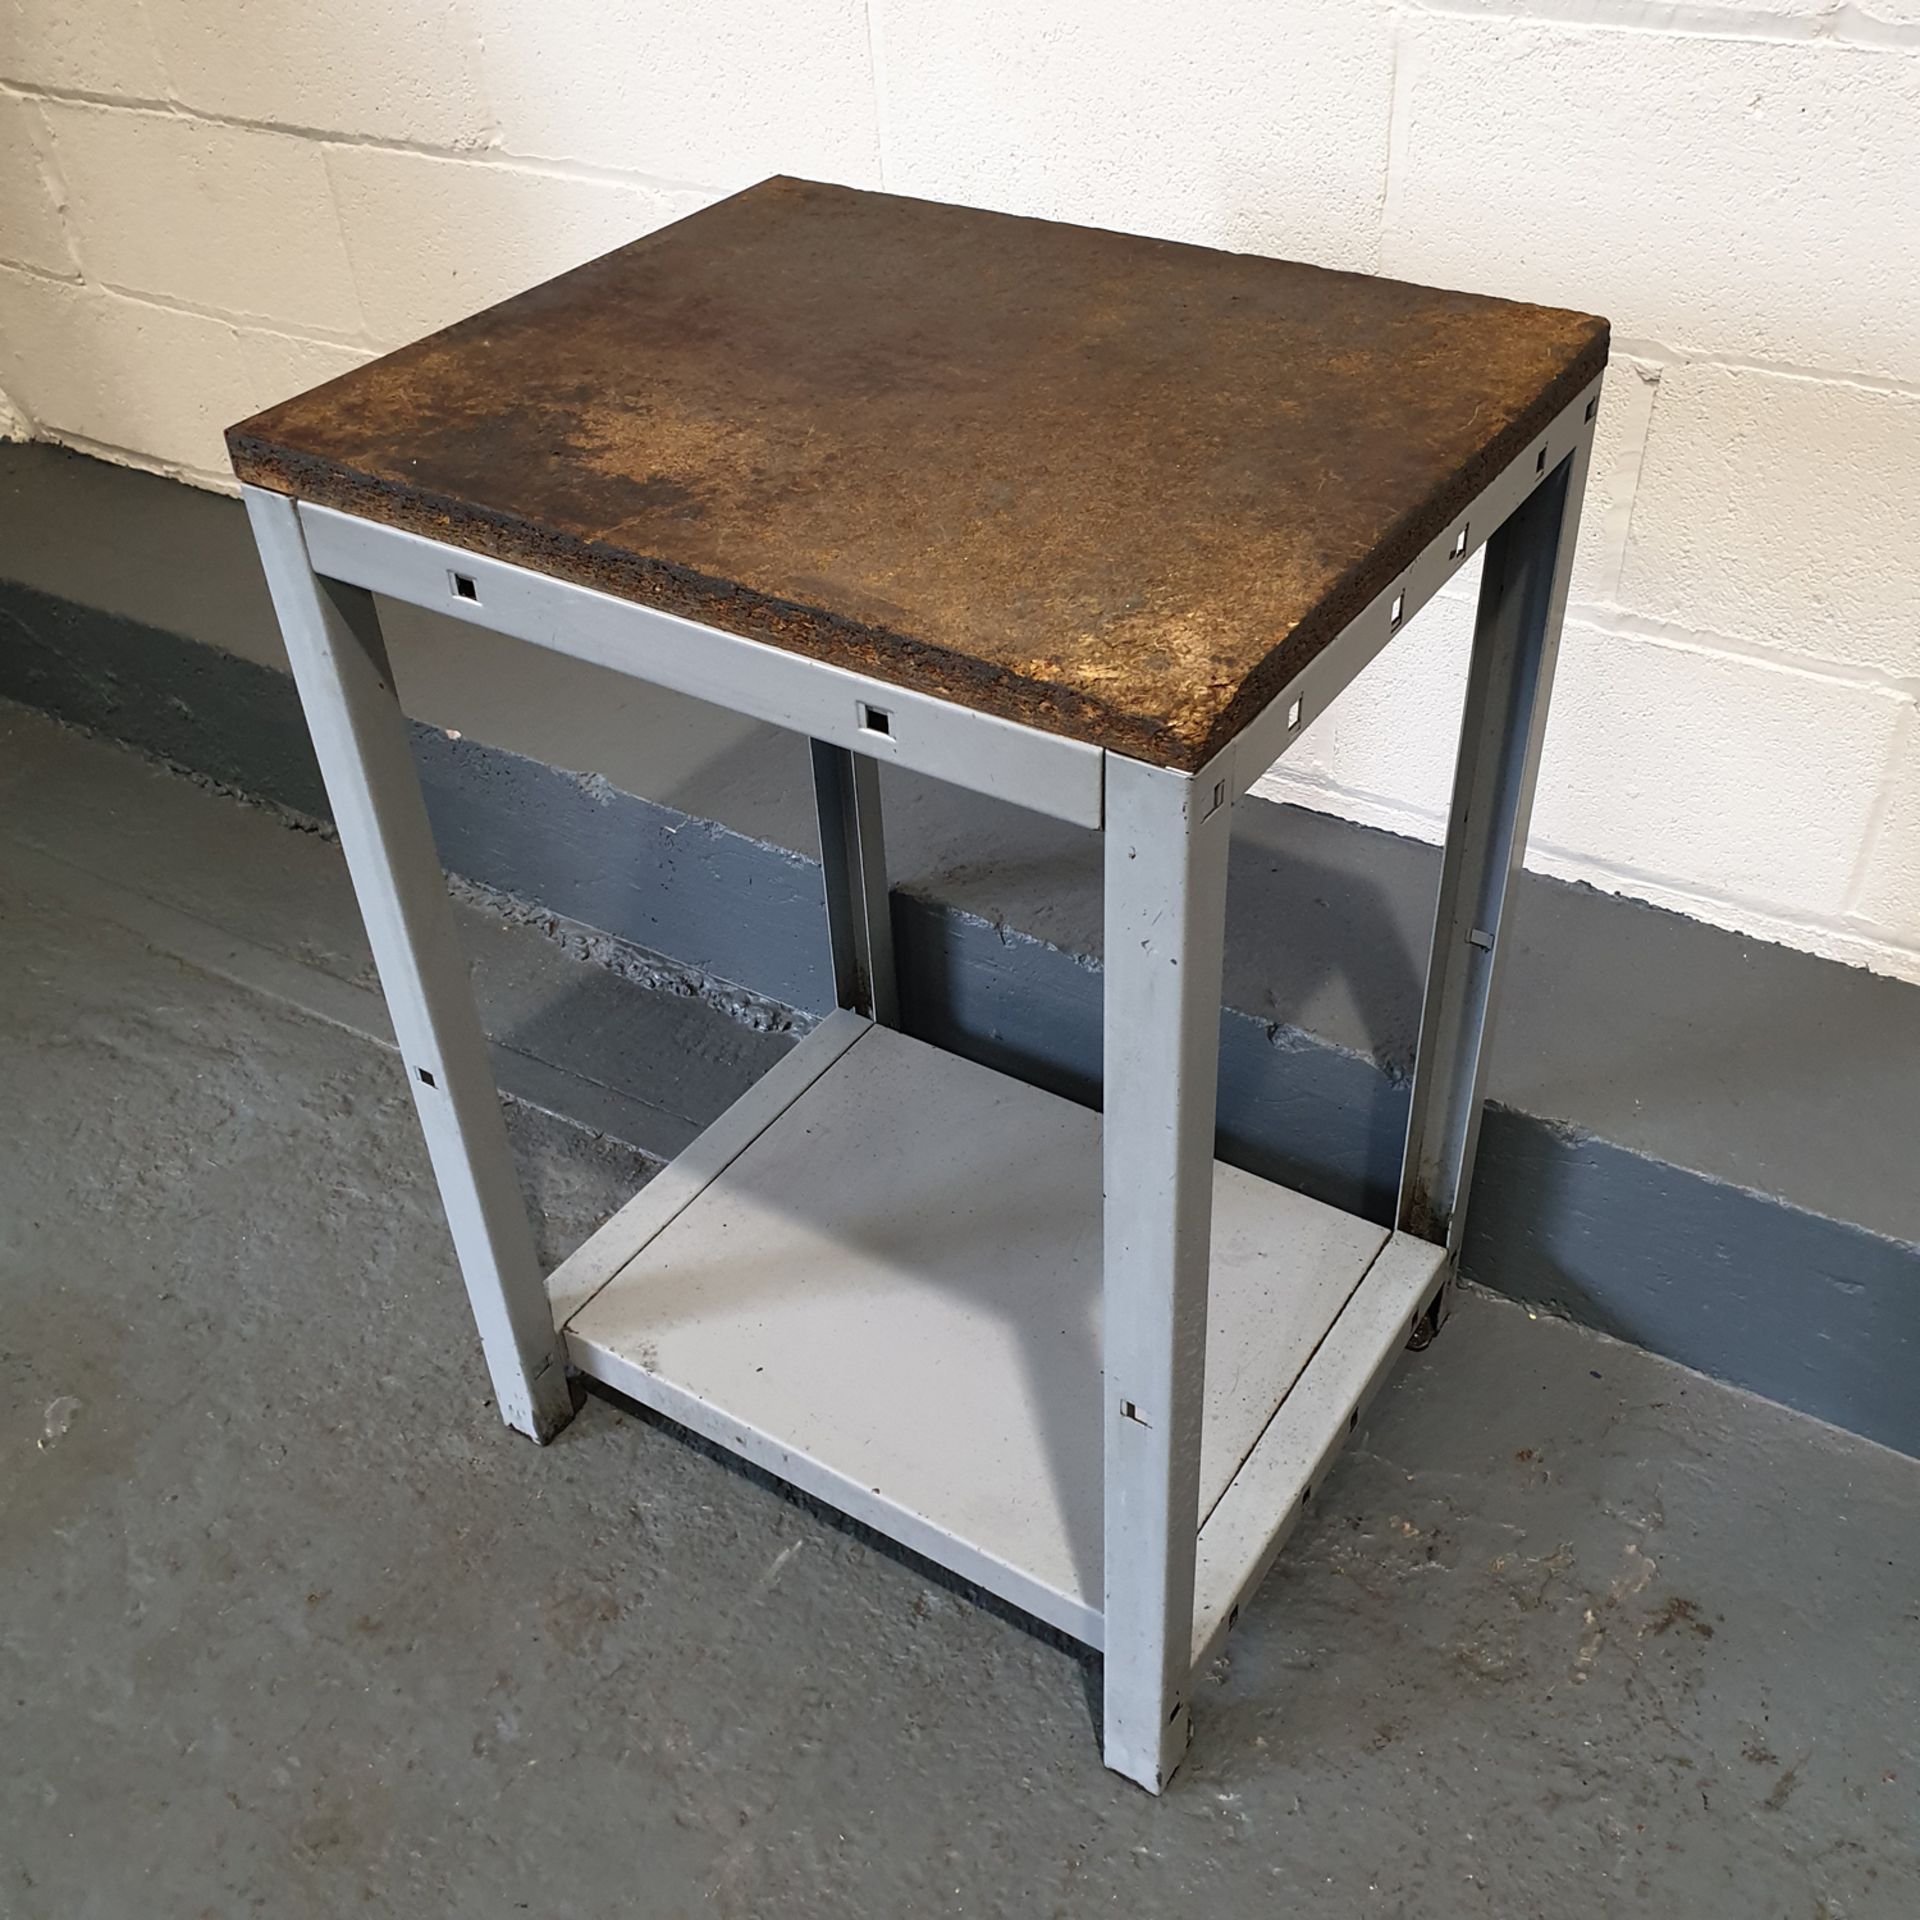 Steel Table with wood Surface. Approx Dimensions 600mm x 500mm x 830mm High. - Image 3 of 3